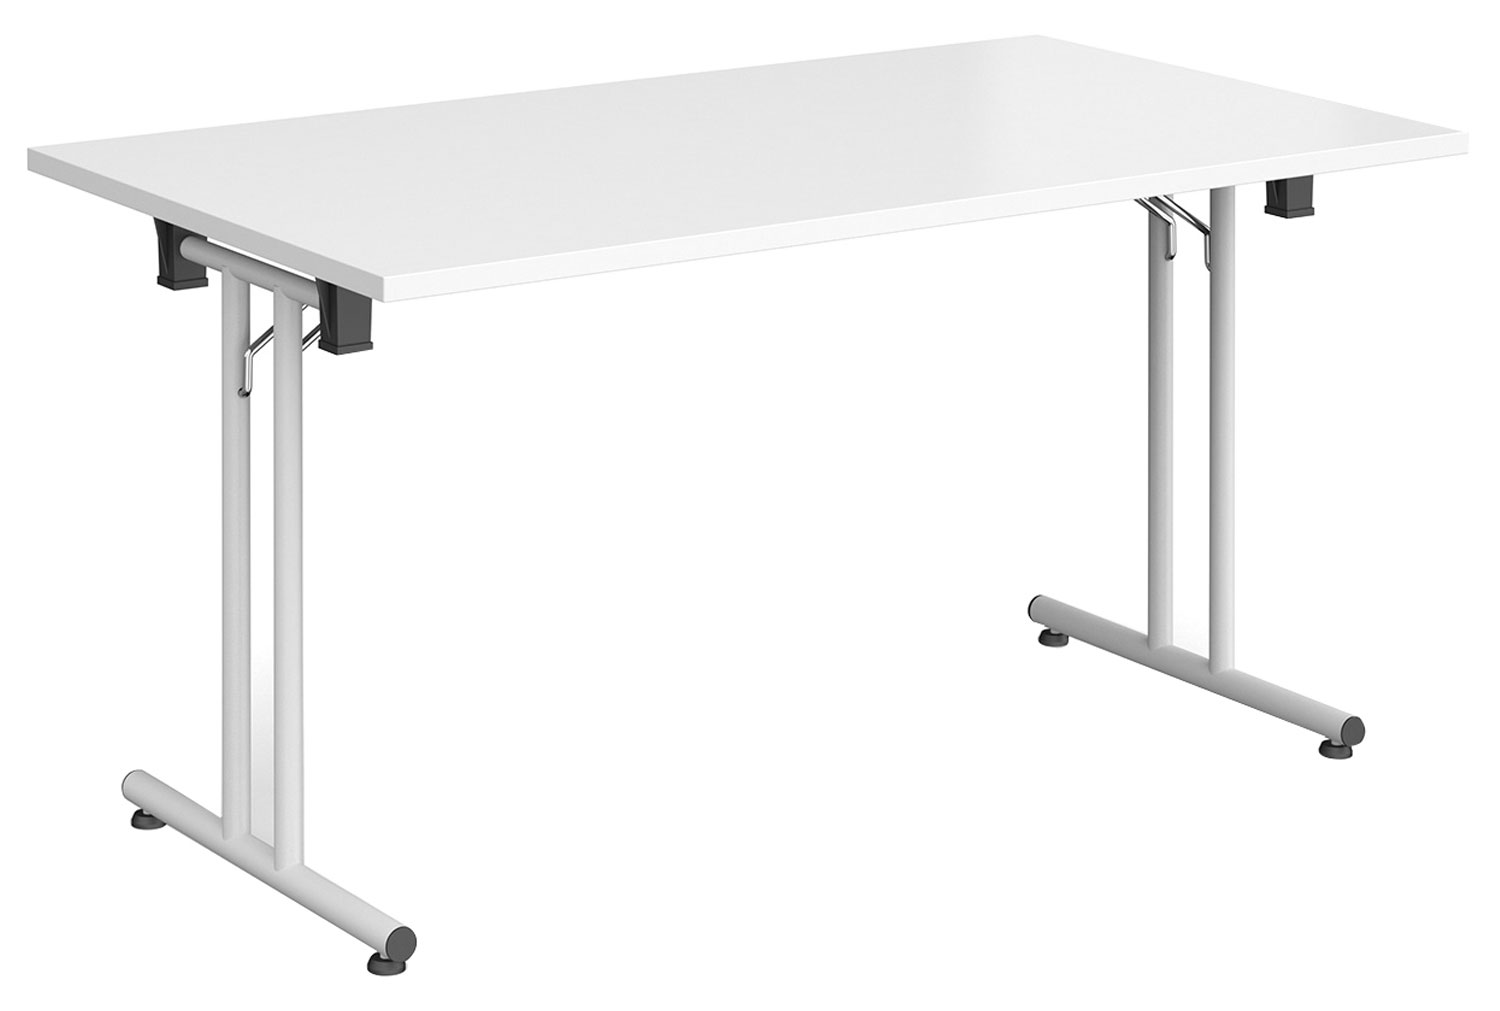 All White Rectangular Folding Table, 140wx80dx73h (cm), Express Delivery